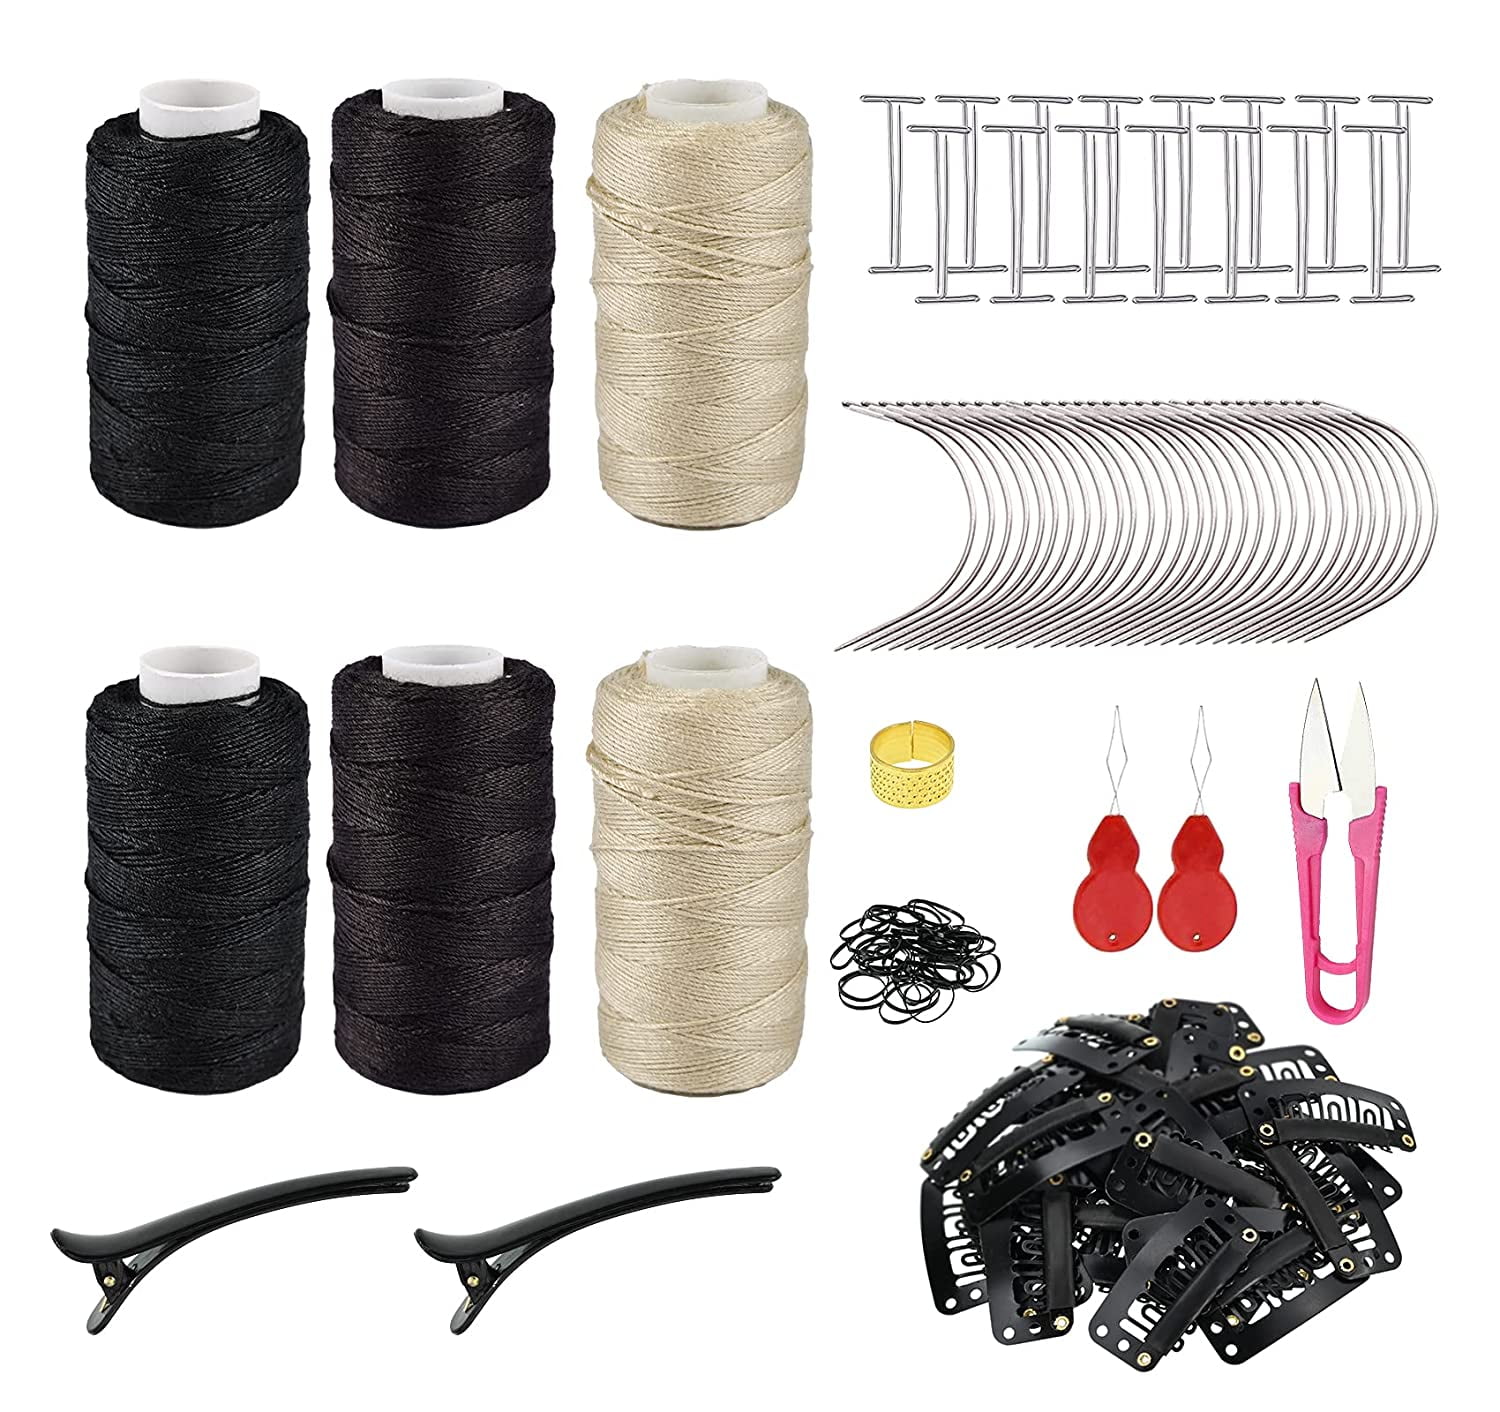 Hair Thread for Hair Extensions Black Thread for Wig，Sewing Scissors,Hair Thread for Making Wig Making Wig Special Line 